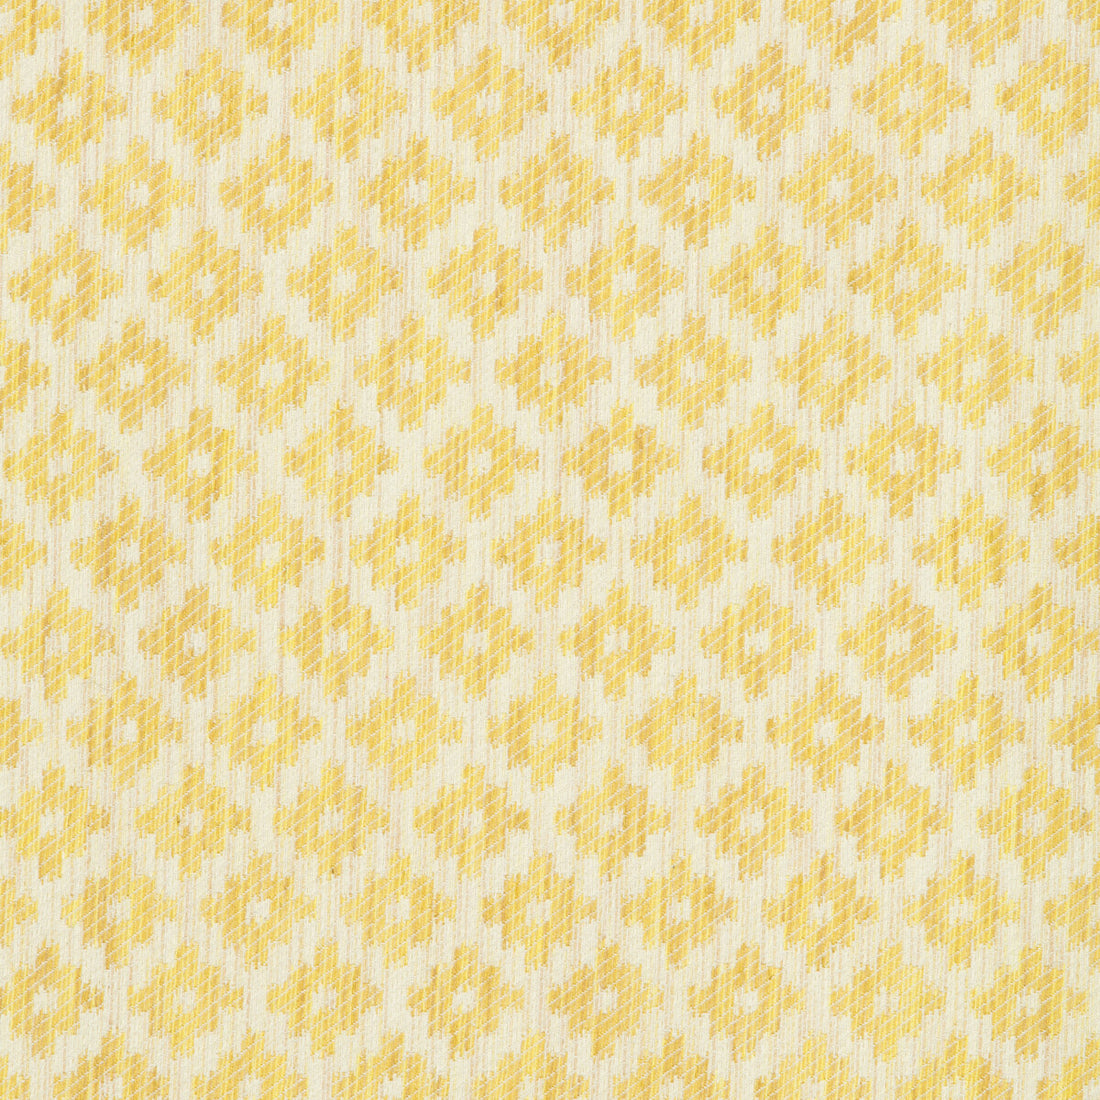 Baronet Strie fabric in canary color - pattern 8017142.40.0 - by Brunschwig &amp; Fils in the Baronet collection